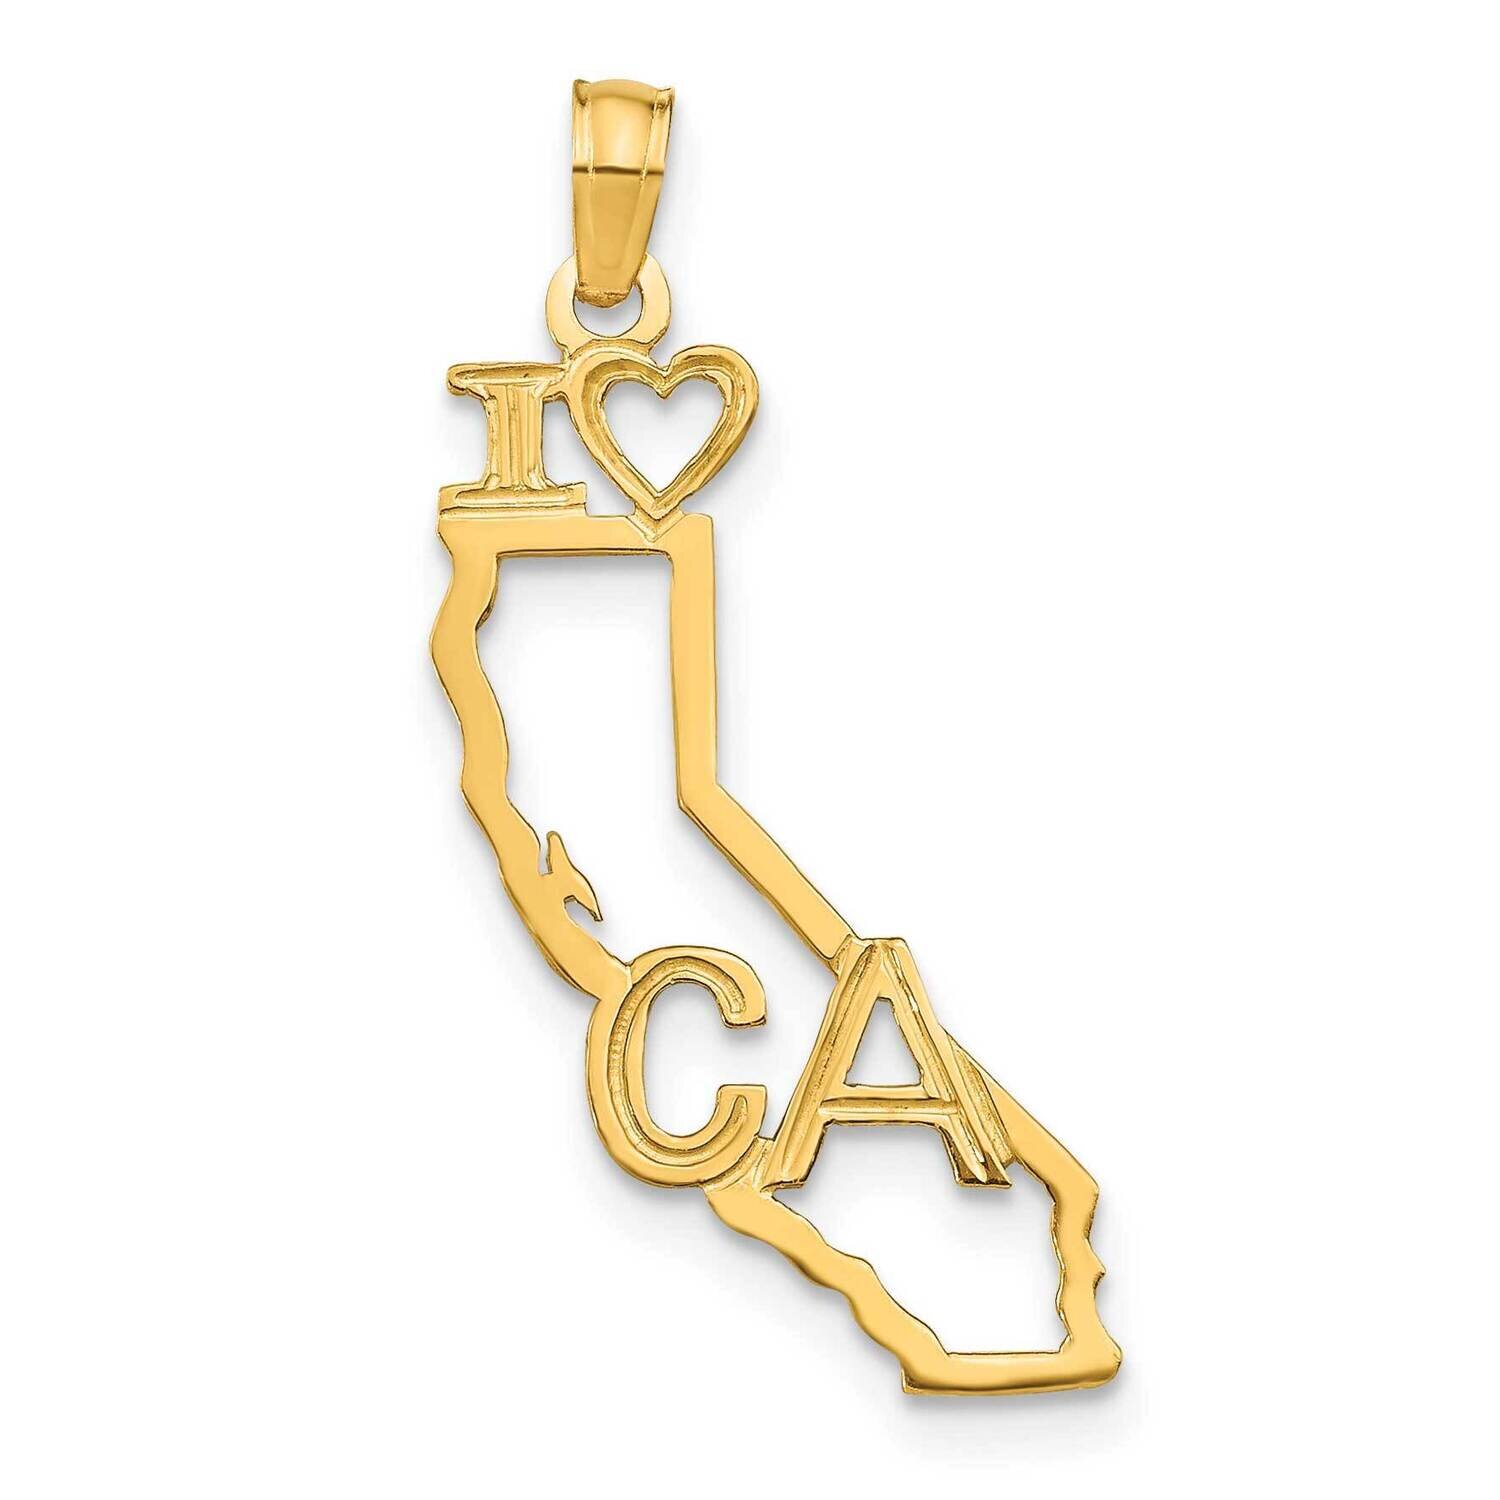 California State Pendant 14k Gold Solid D1152